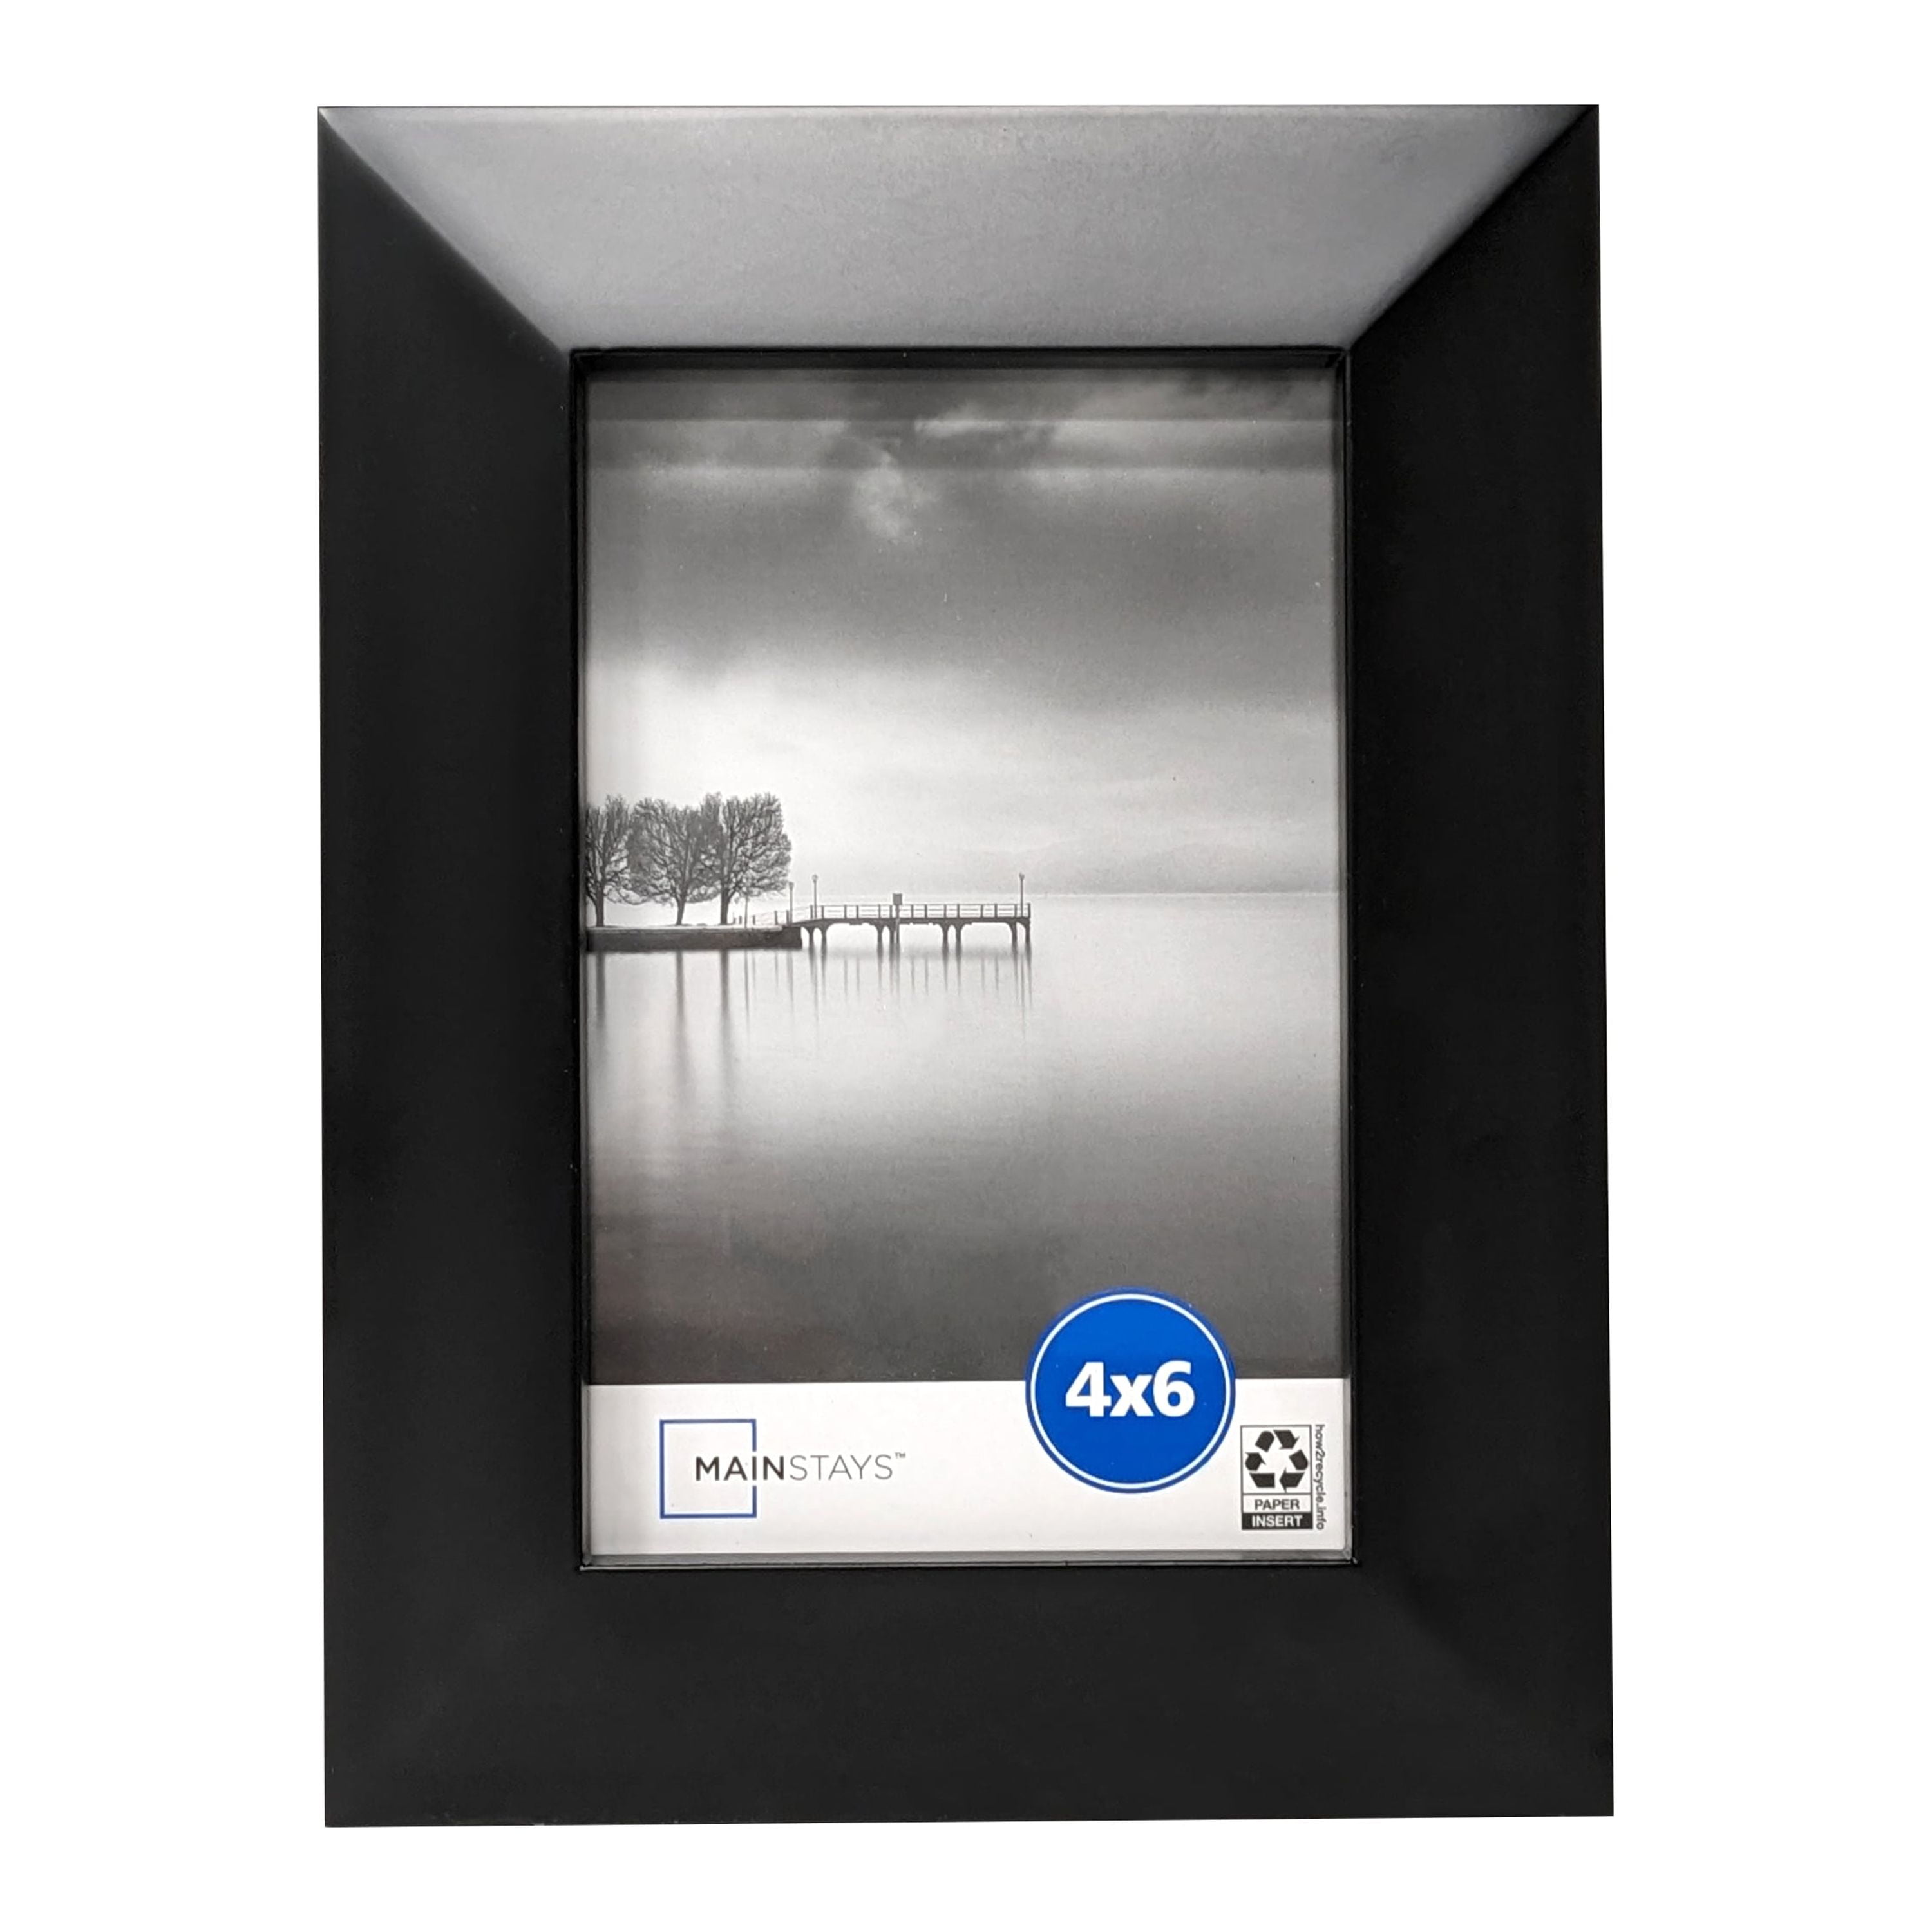 Mainstays 11x14 Matted to 8x10 Linear Frame, Black. No glass